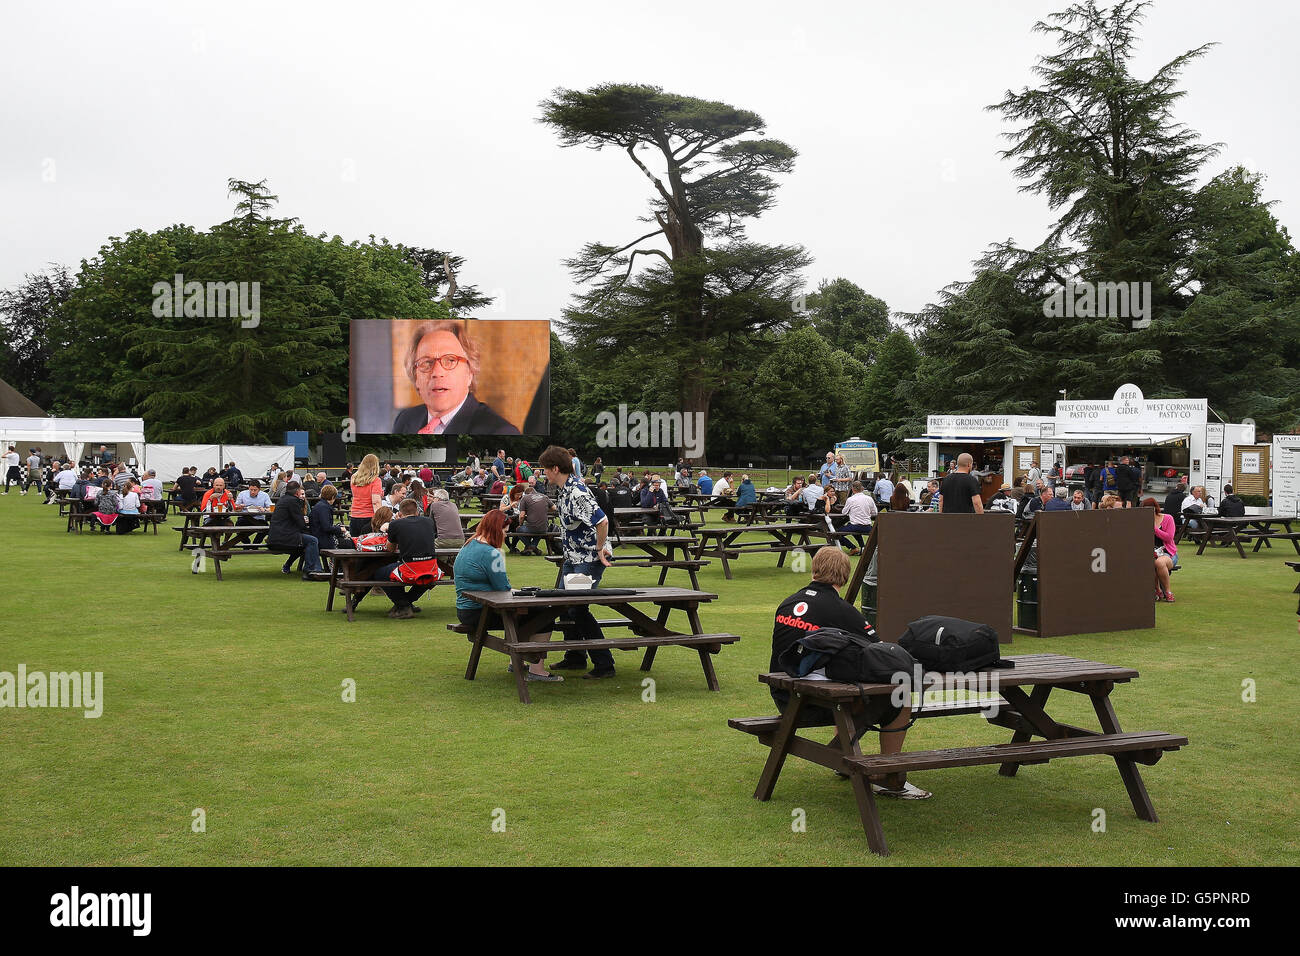 Goodwood, West Sussex, UK. 23rd June, 2016. Goodwood, West Susses, UK, 23/6/16 Credit:  Malcolm Greig/Alamy Live News Stock Photo